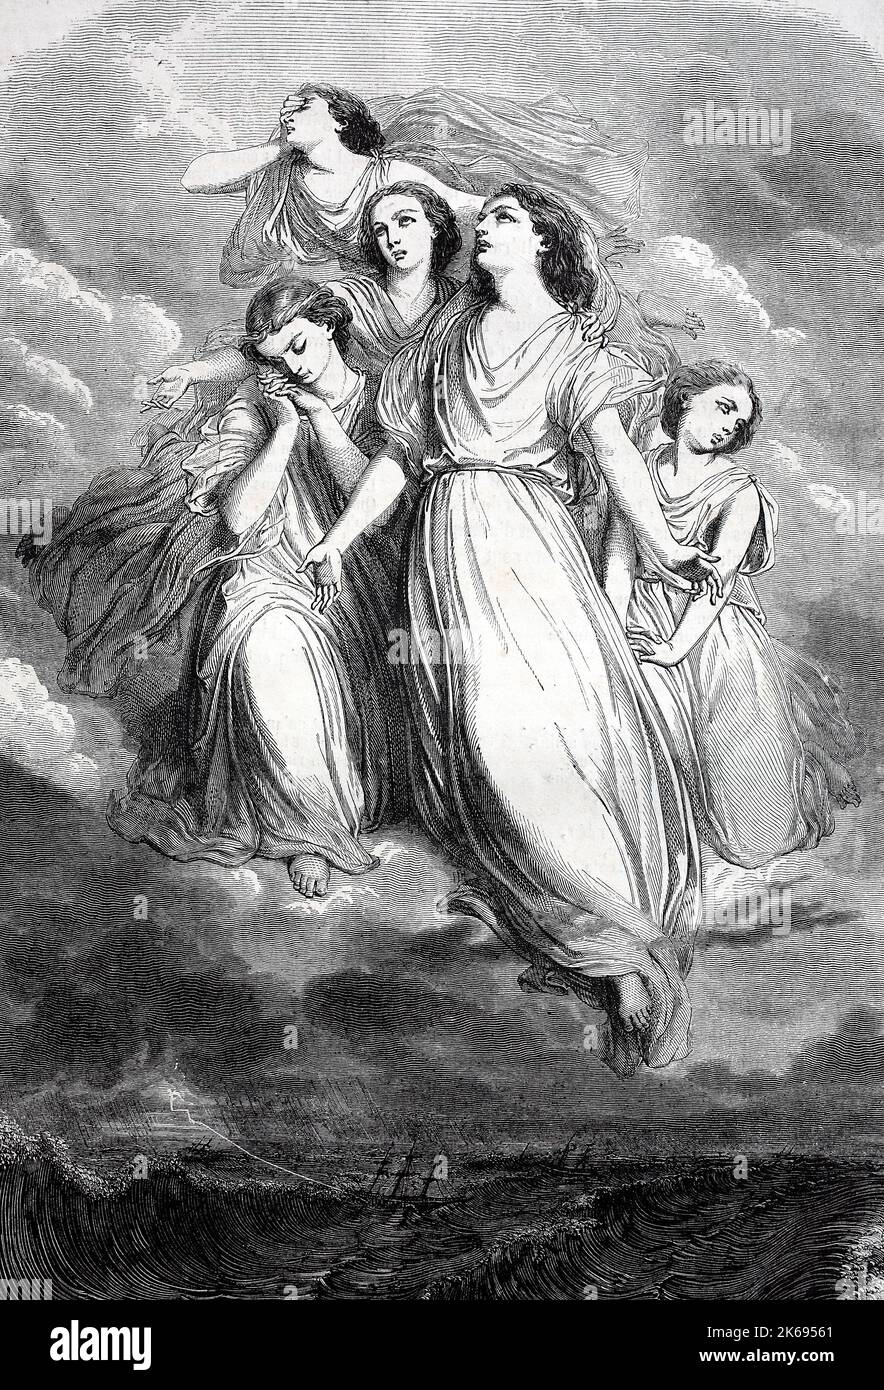 Digital improved reproduction, five women float over the stormy sea, sirens, mermaids of pierre-gustave staal, original woodprint from th 19th century Stock Photo